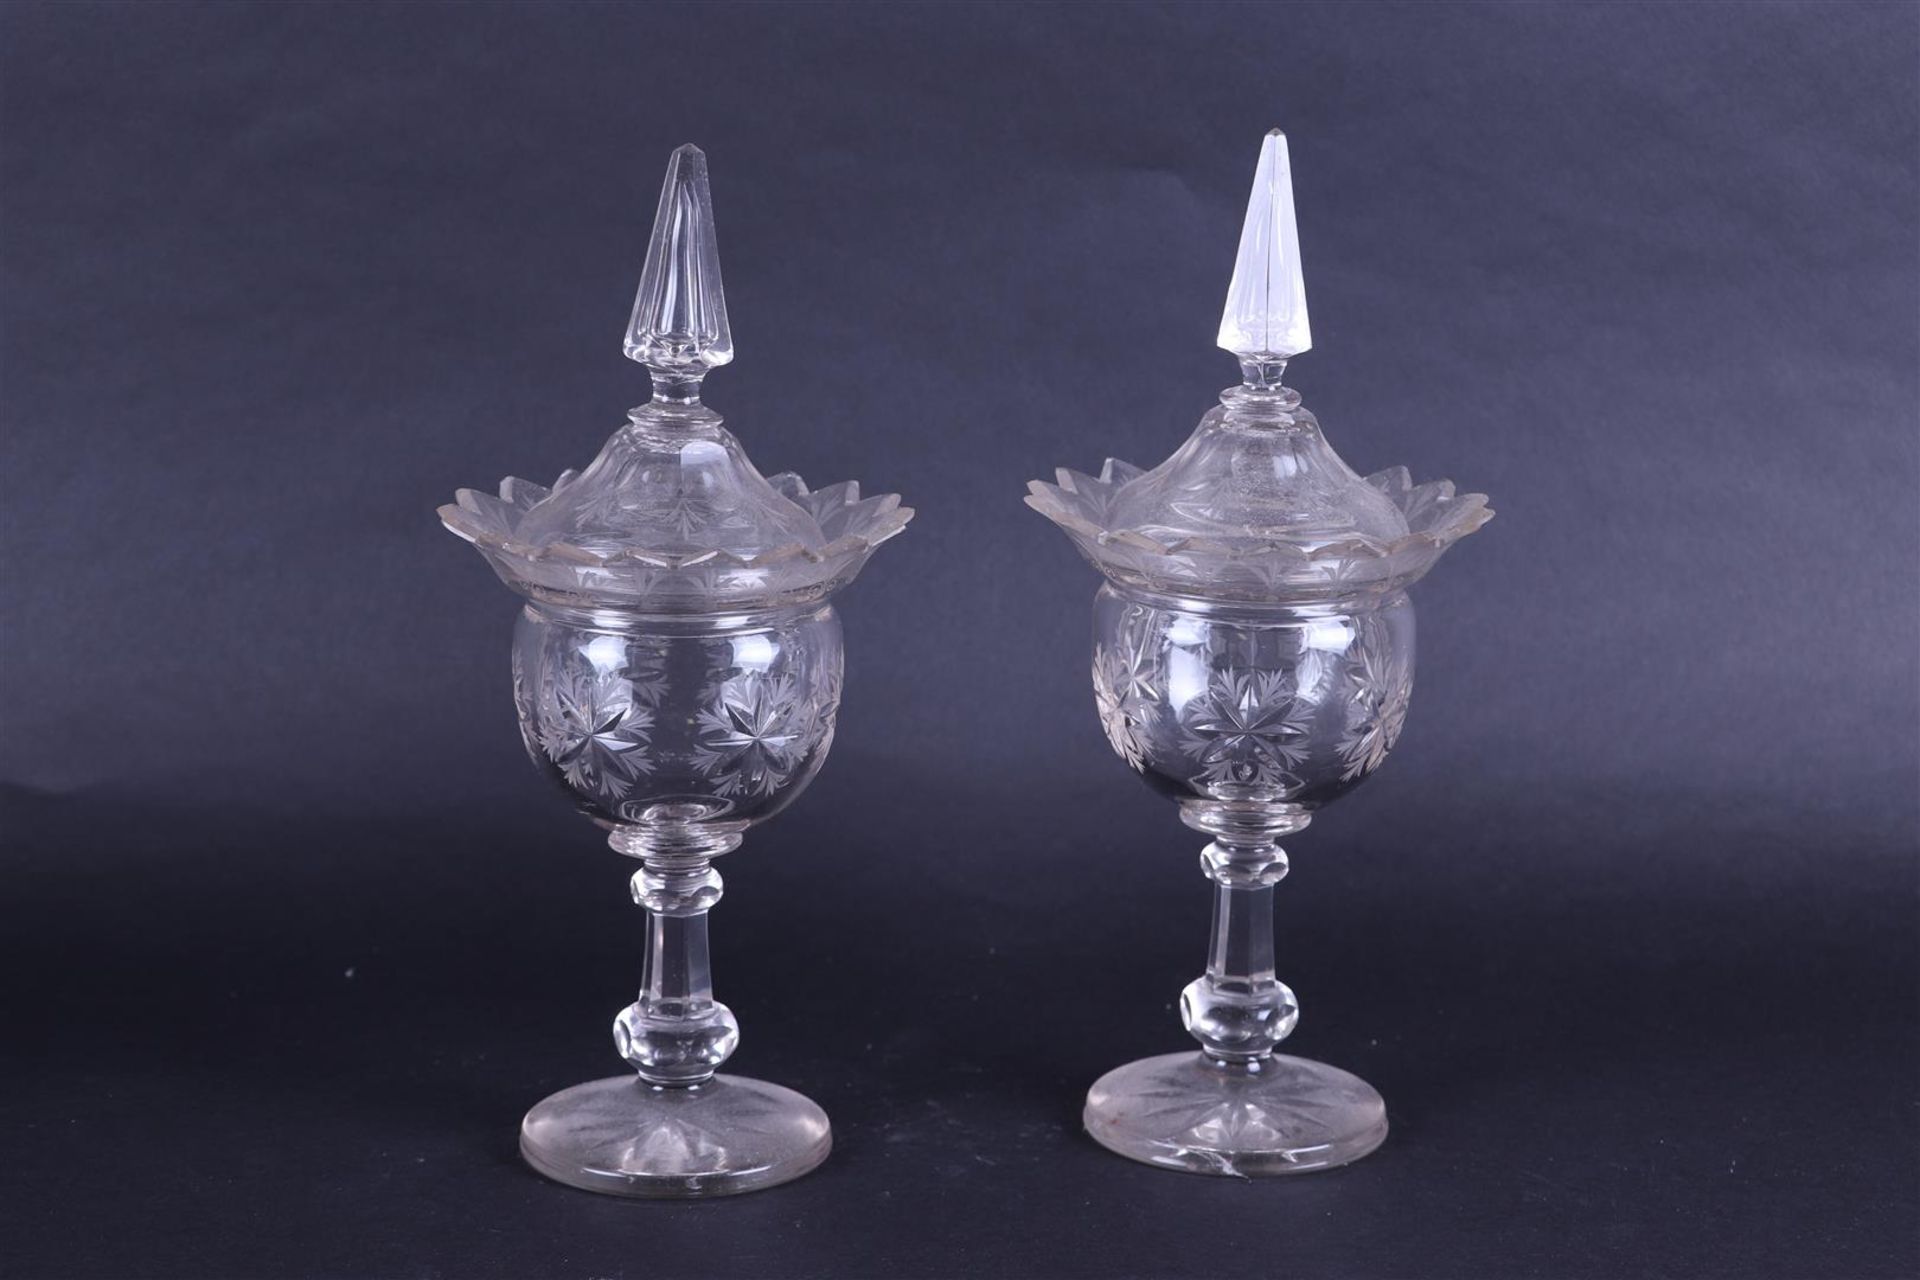 A pair of cut glass ginger slices, ca. 1900.